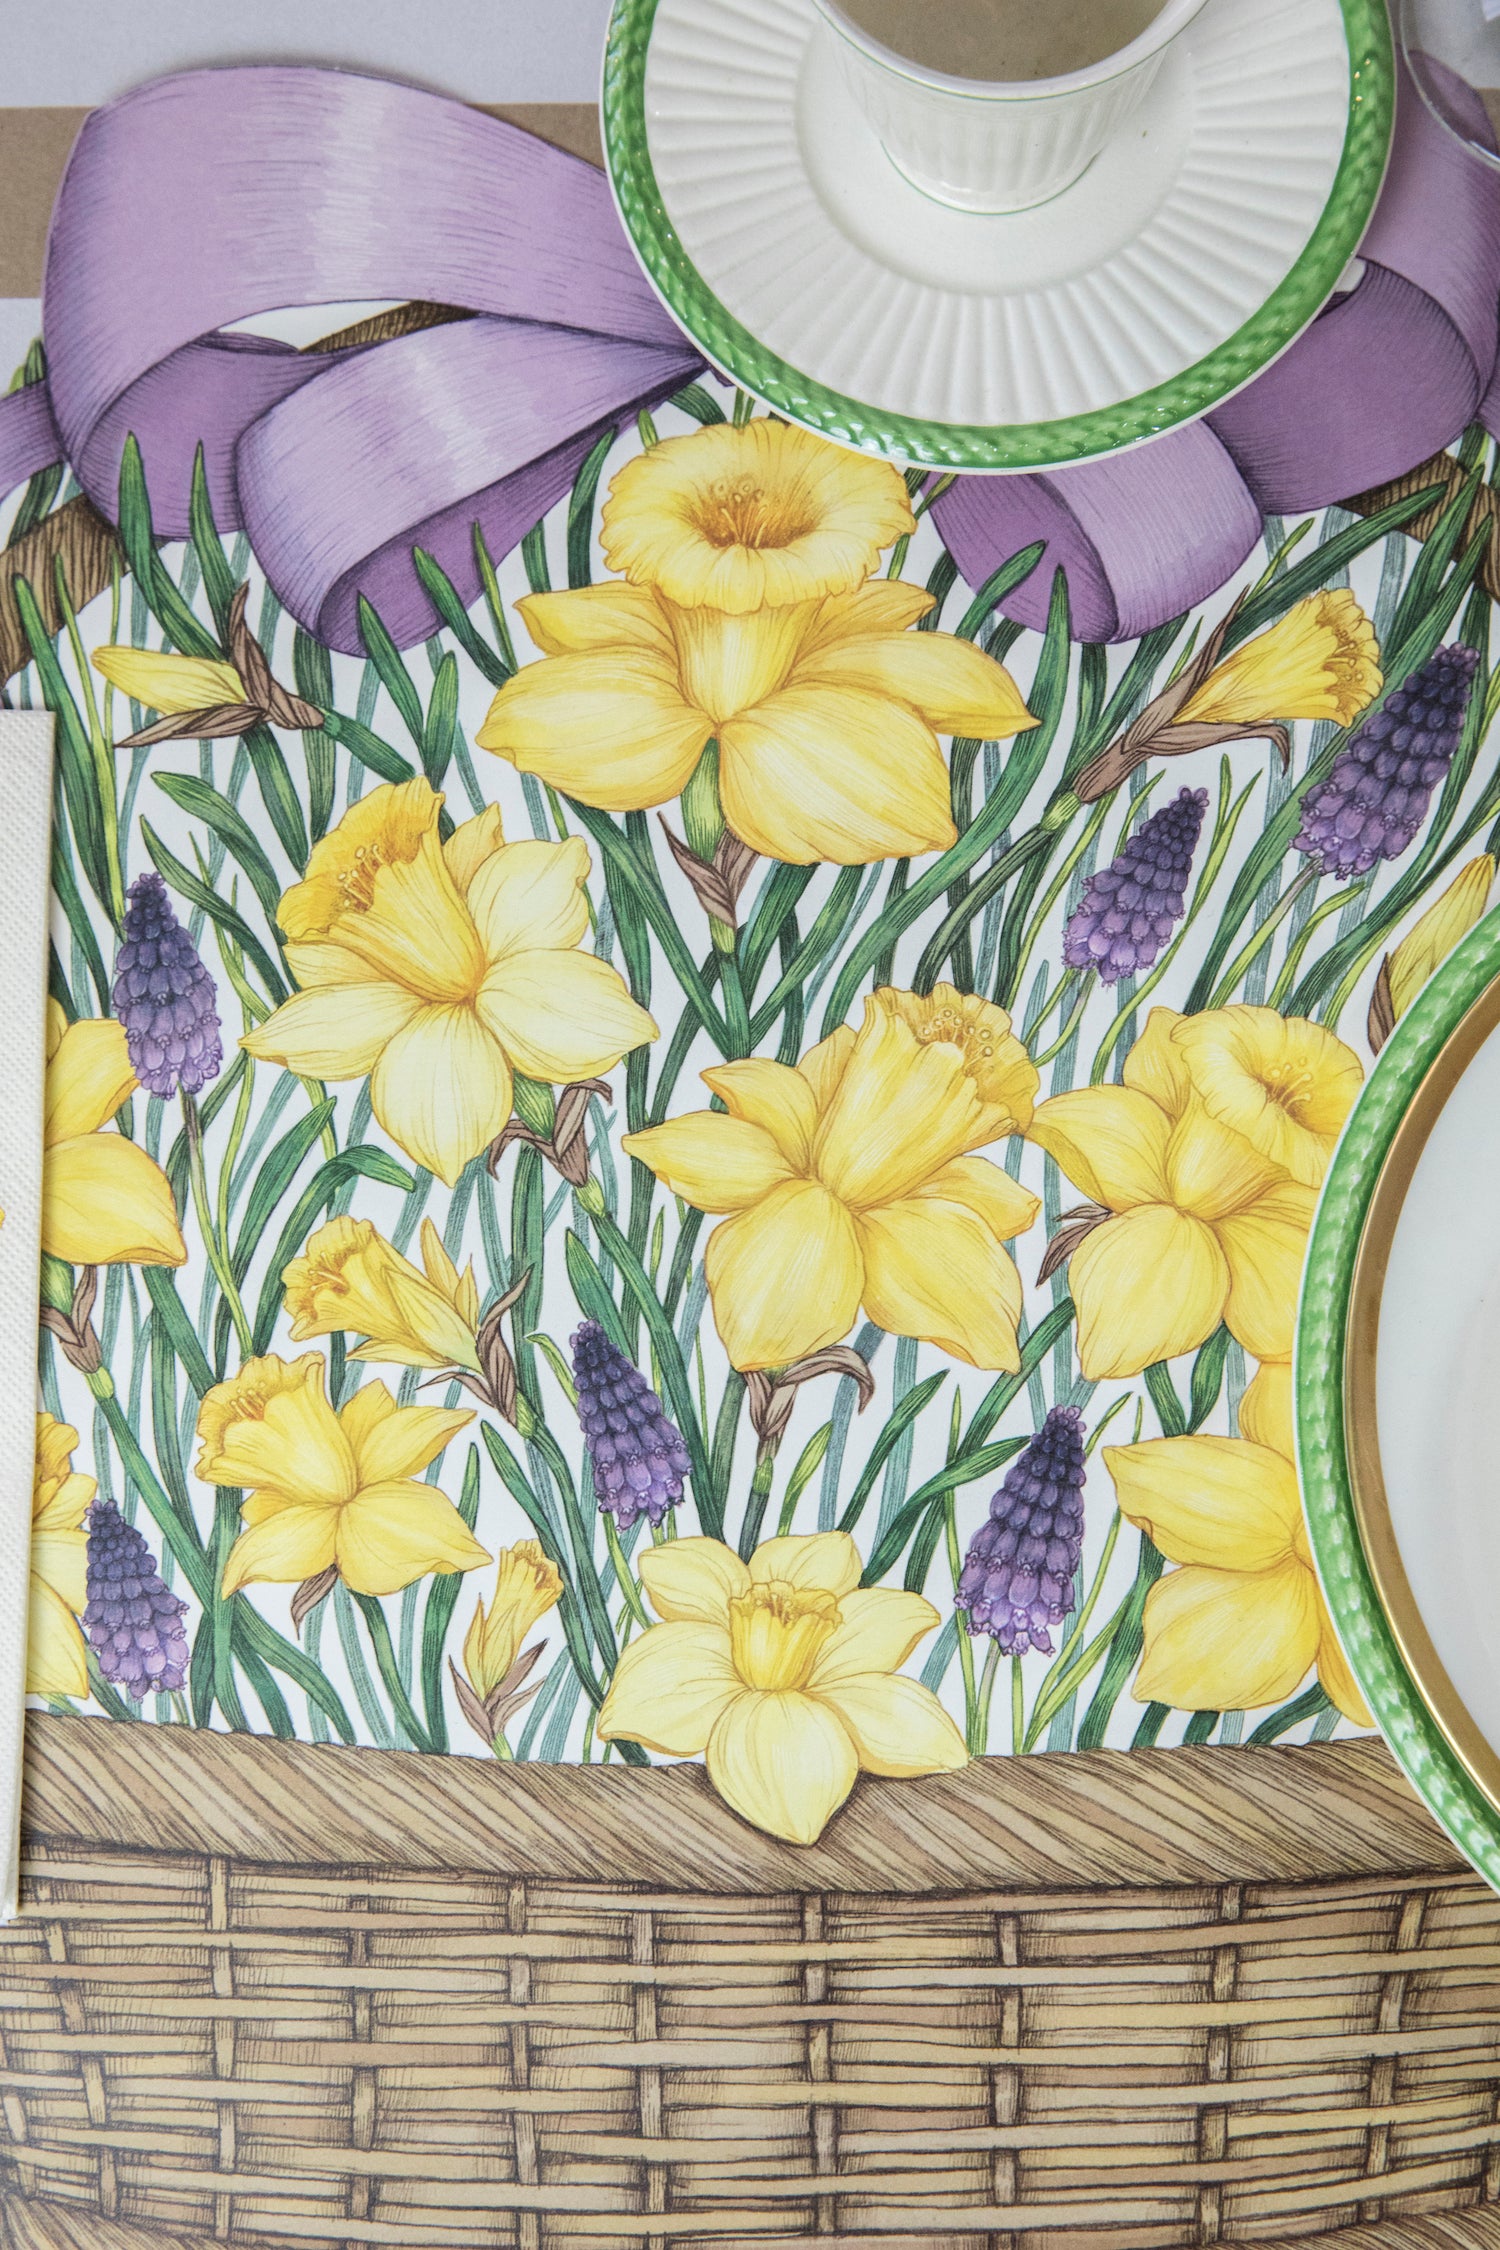 Close-up of the Die-cut Daffodil Basket Placemat under an elegant Easter place setting, showing the flowers in detail.